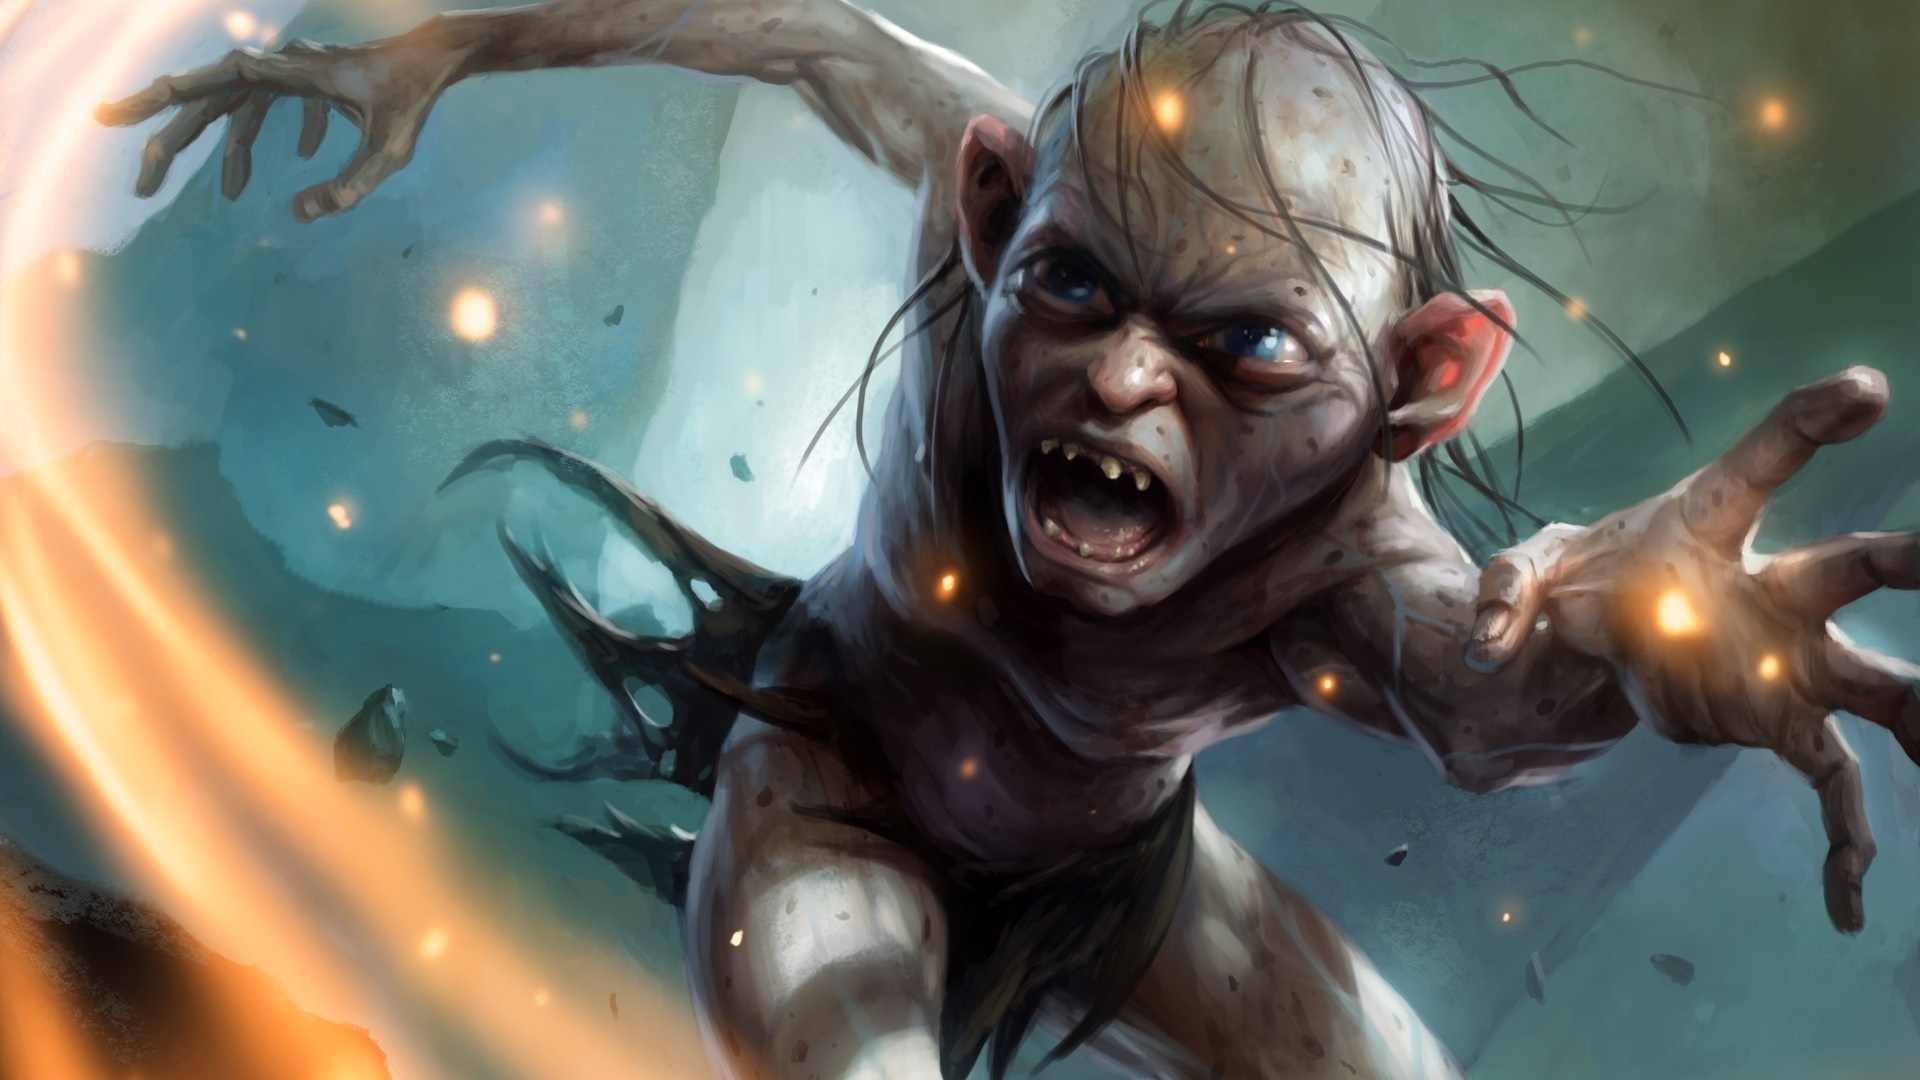 Gollum p k k hd wallpapers backgrounds free download rare gallery